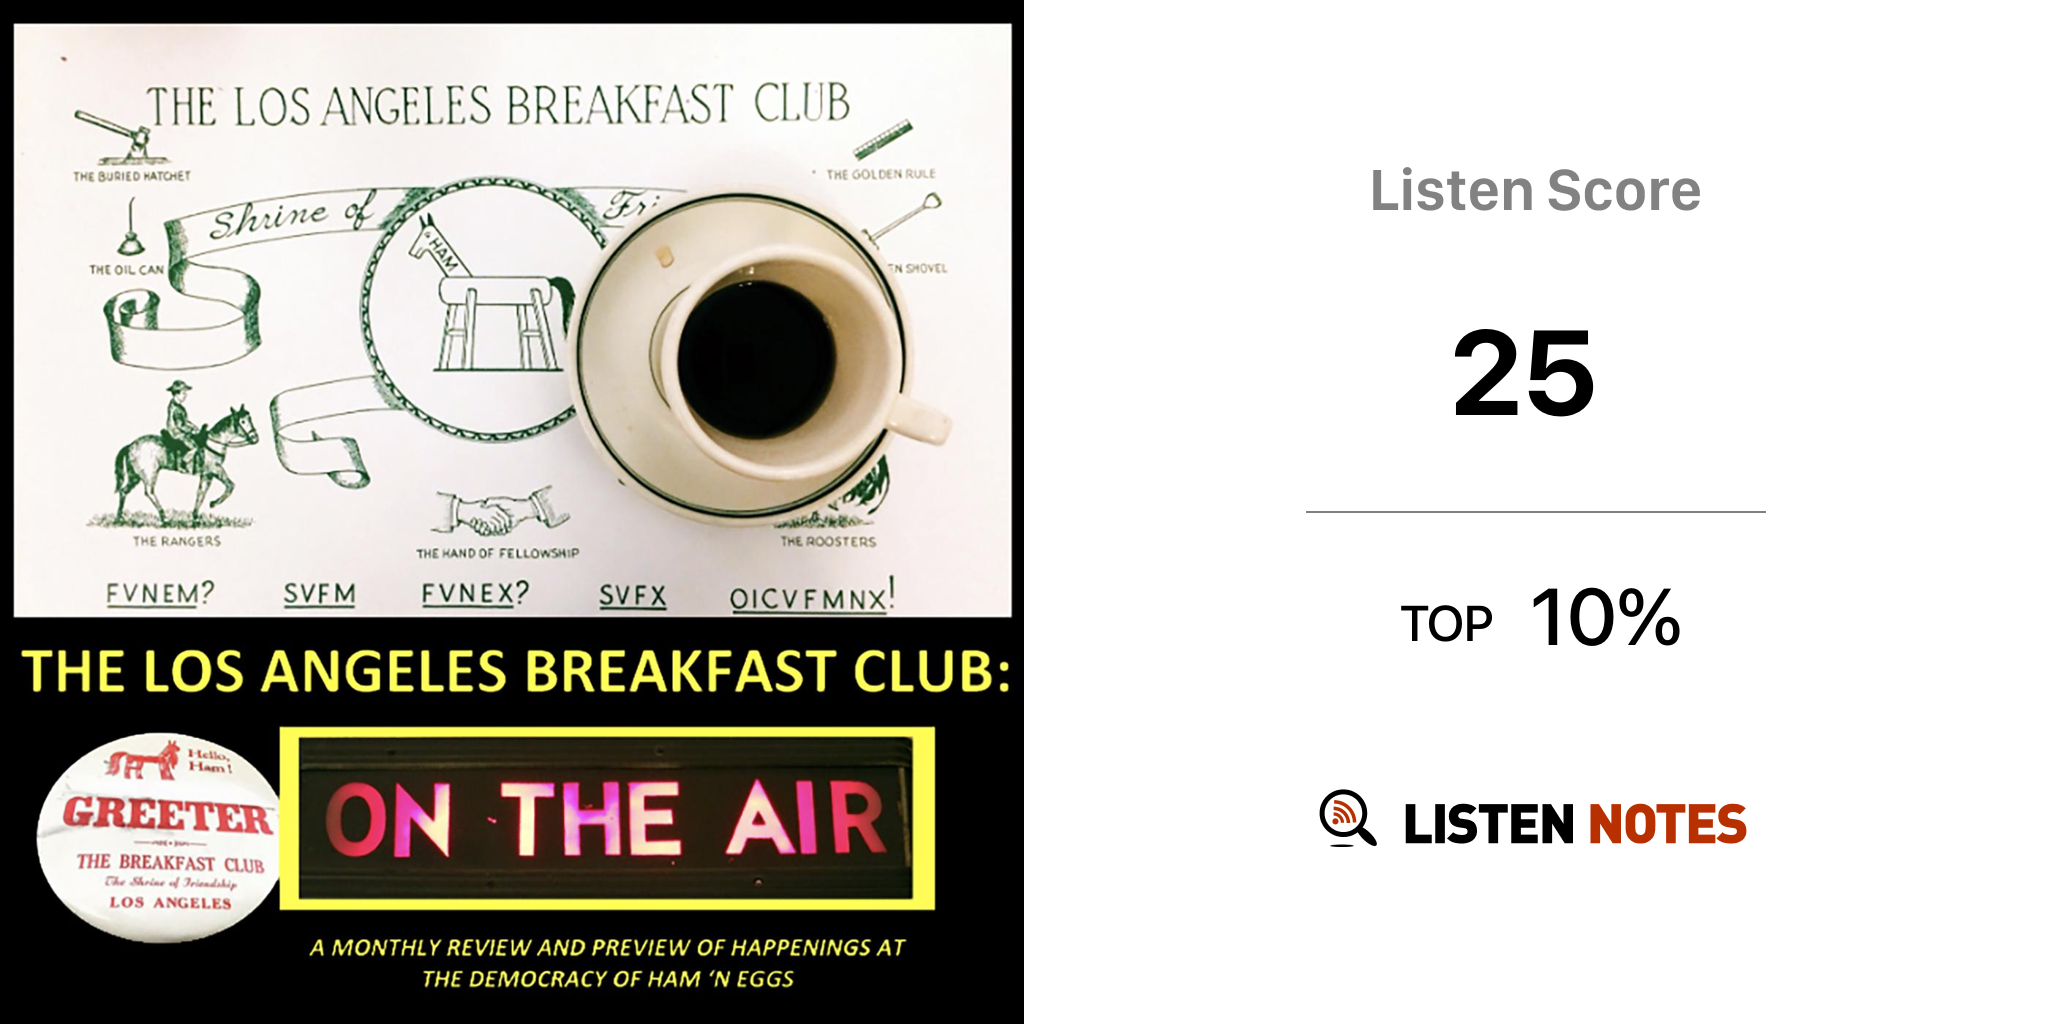 The Los Angeles Breakfast Club: ON THE AIR (podcast) - Phil Leirness |  Listen Notes